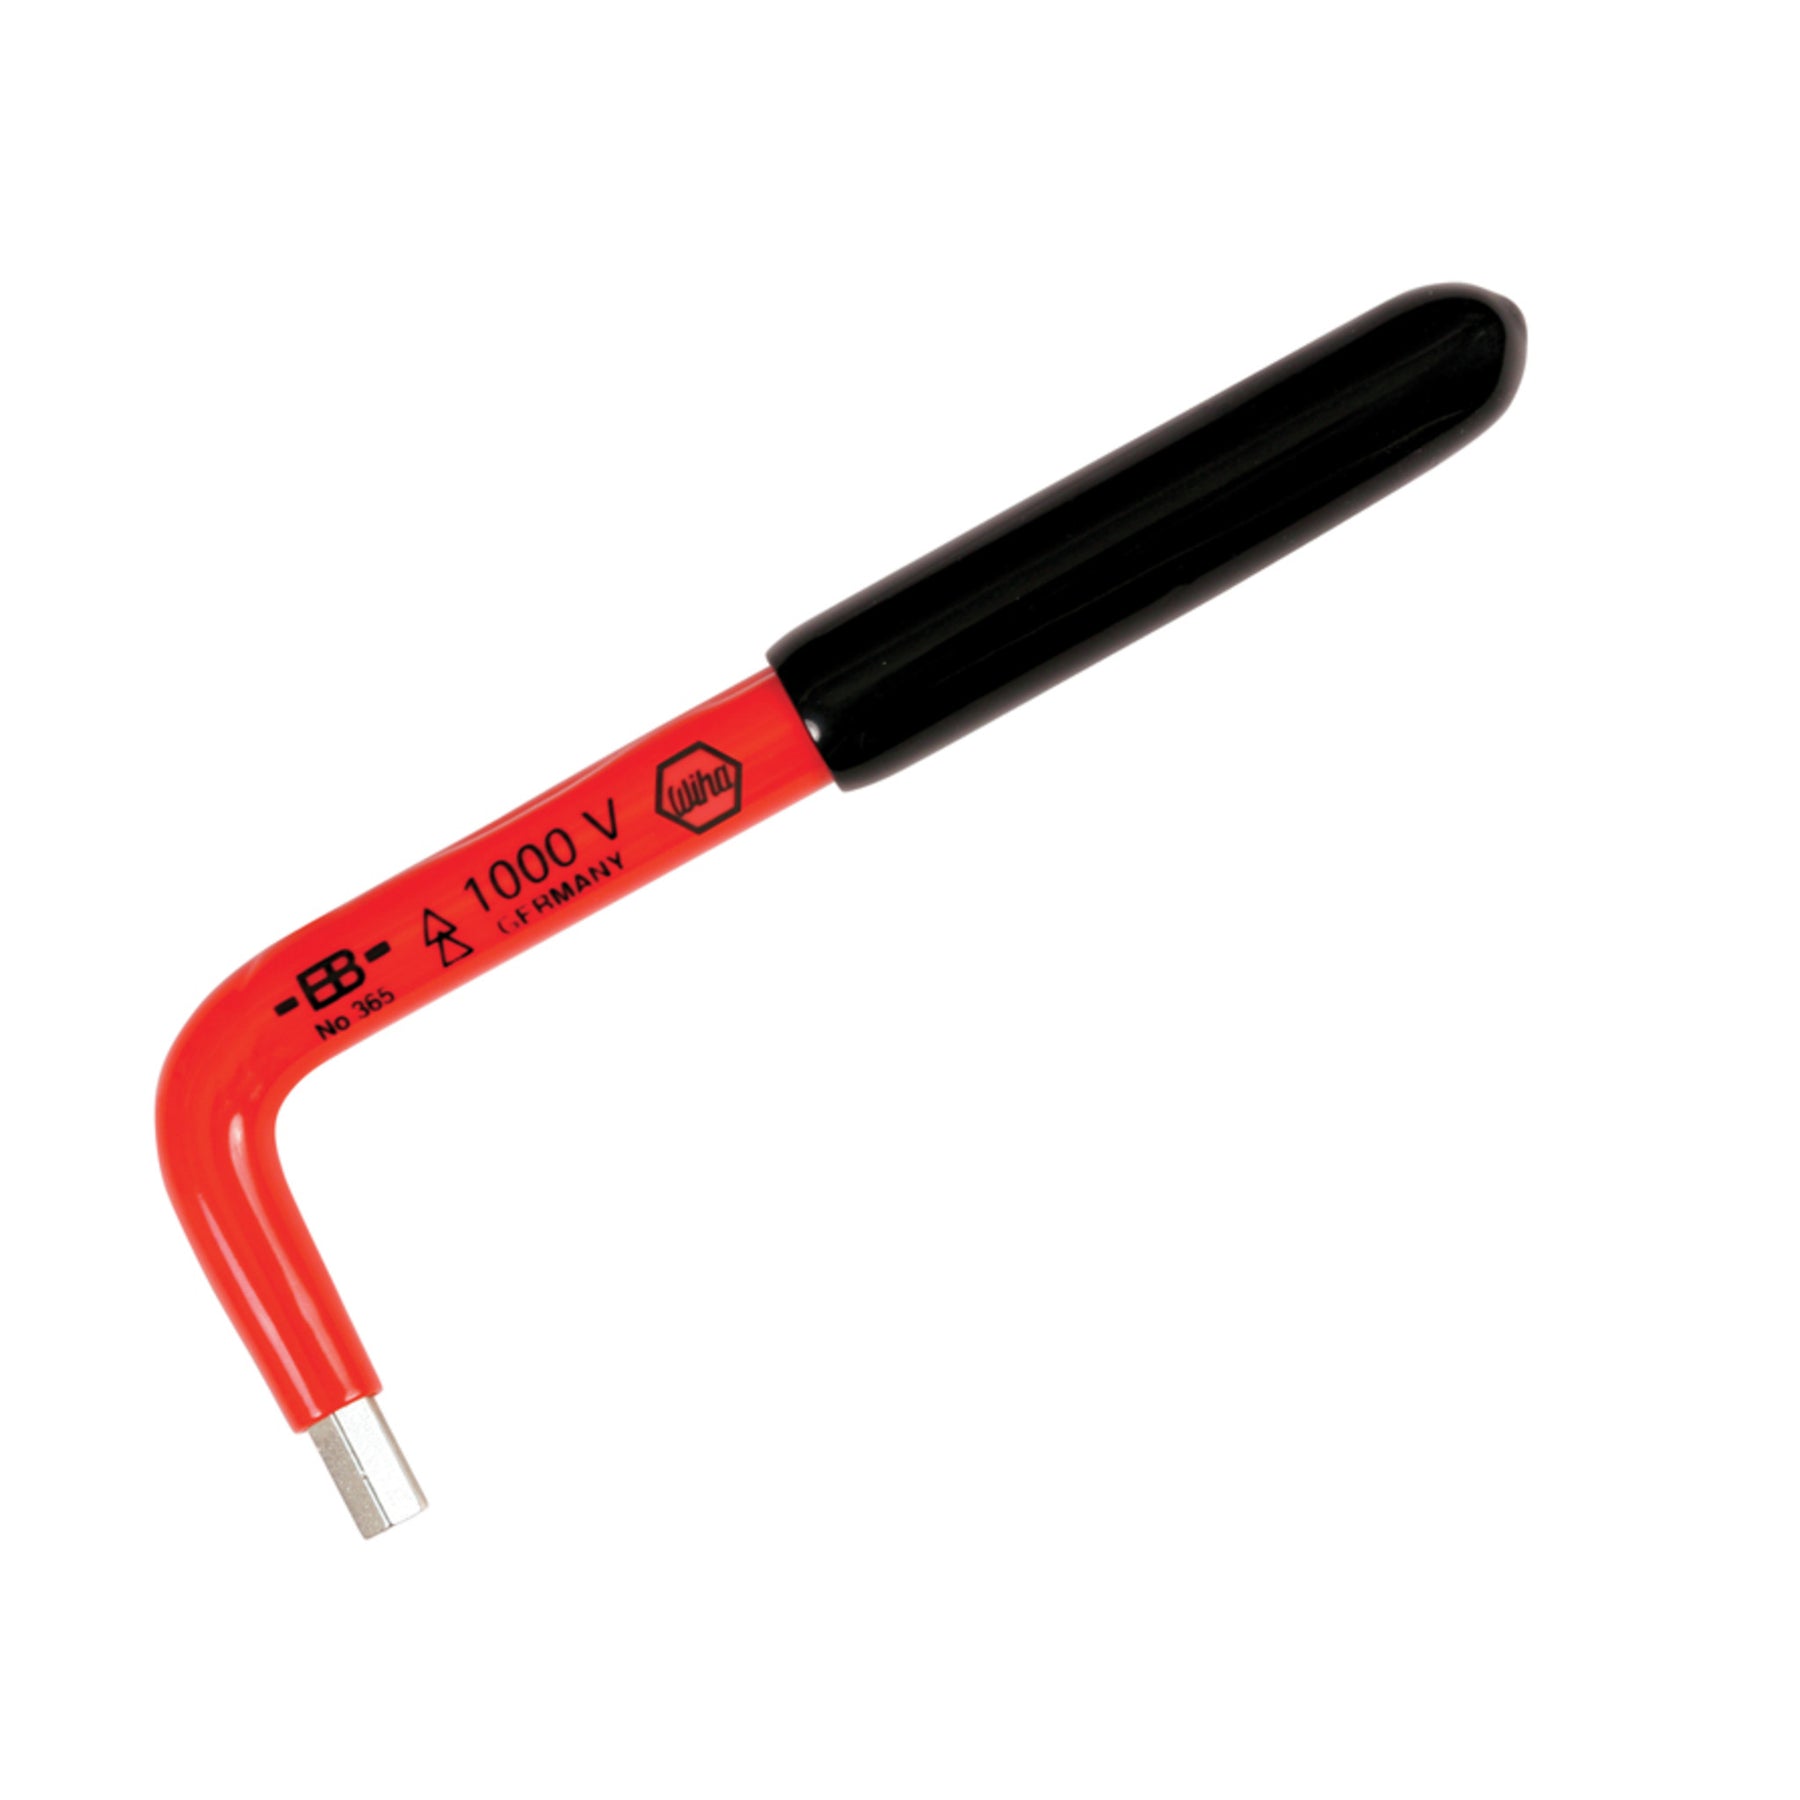 Insulated Hex Key 5/64" x 3.3"